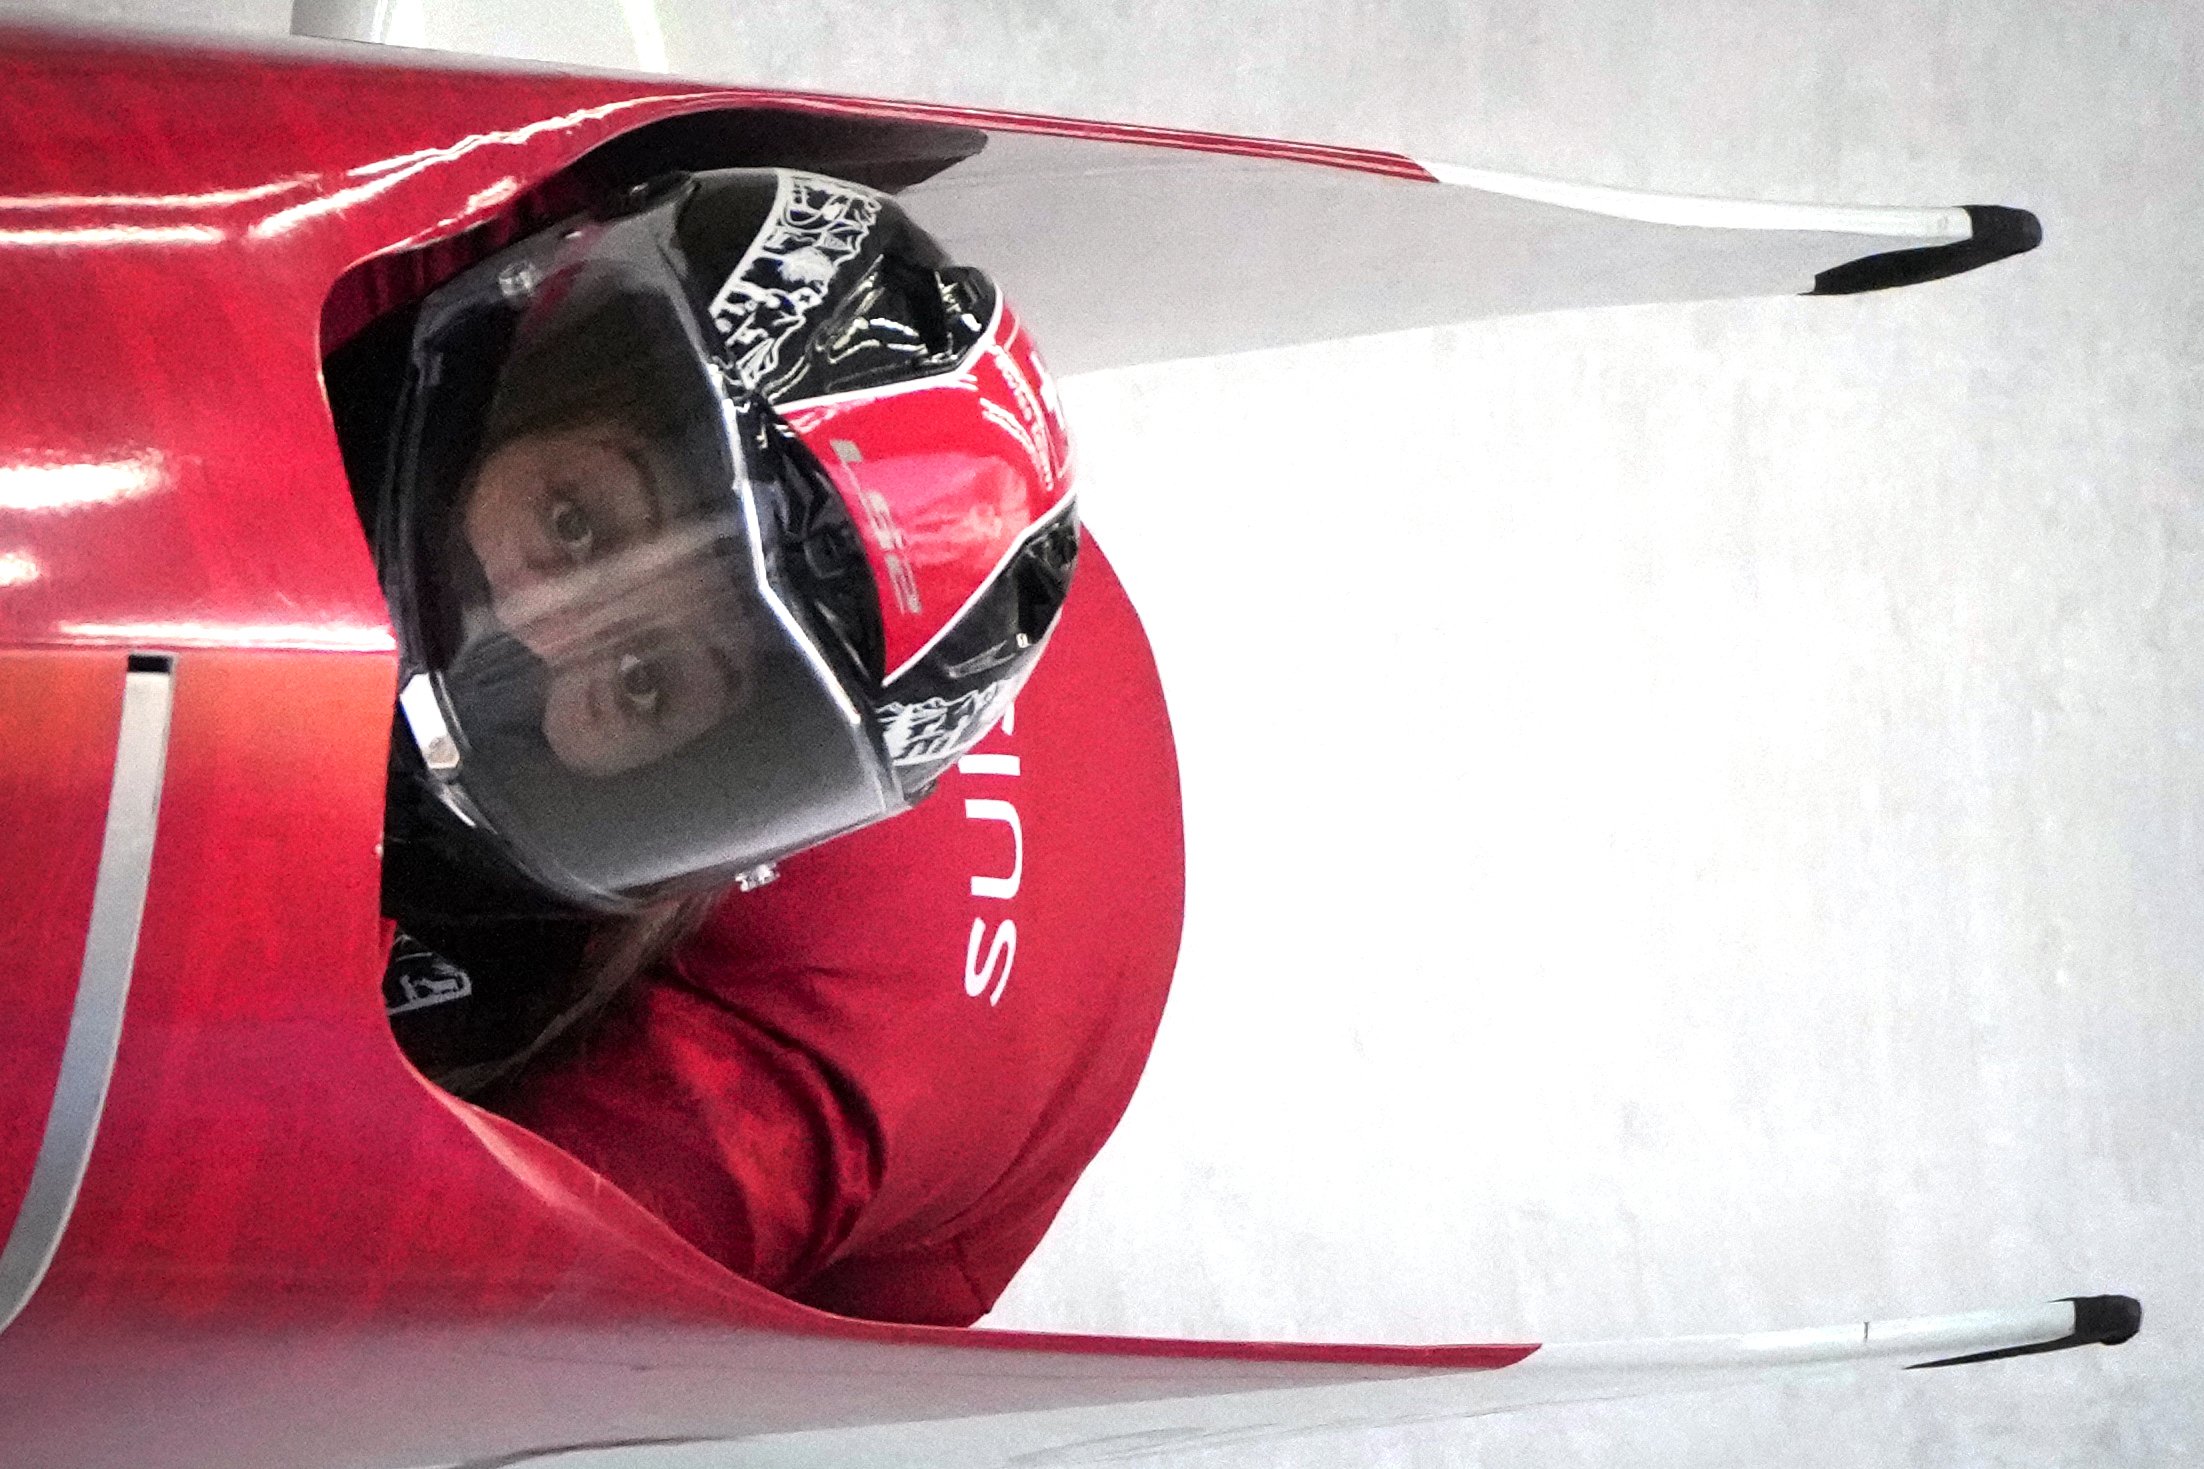  Melanie Hasler of Switzerland speeds down the track during a 2-woman bobsled training at the 2022 Winter Olympics, Tuesday, Feb. 15, 2022, in the Yanqing district of Beijing. (AP Photo/Mark Schiefelbein) 